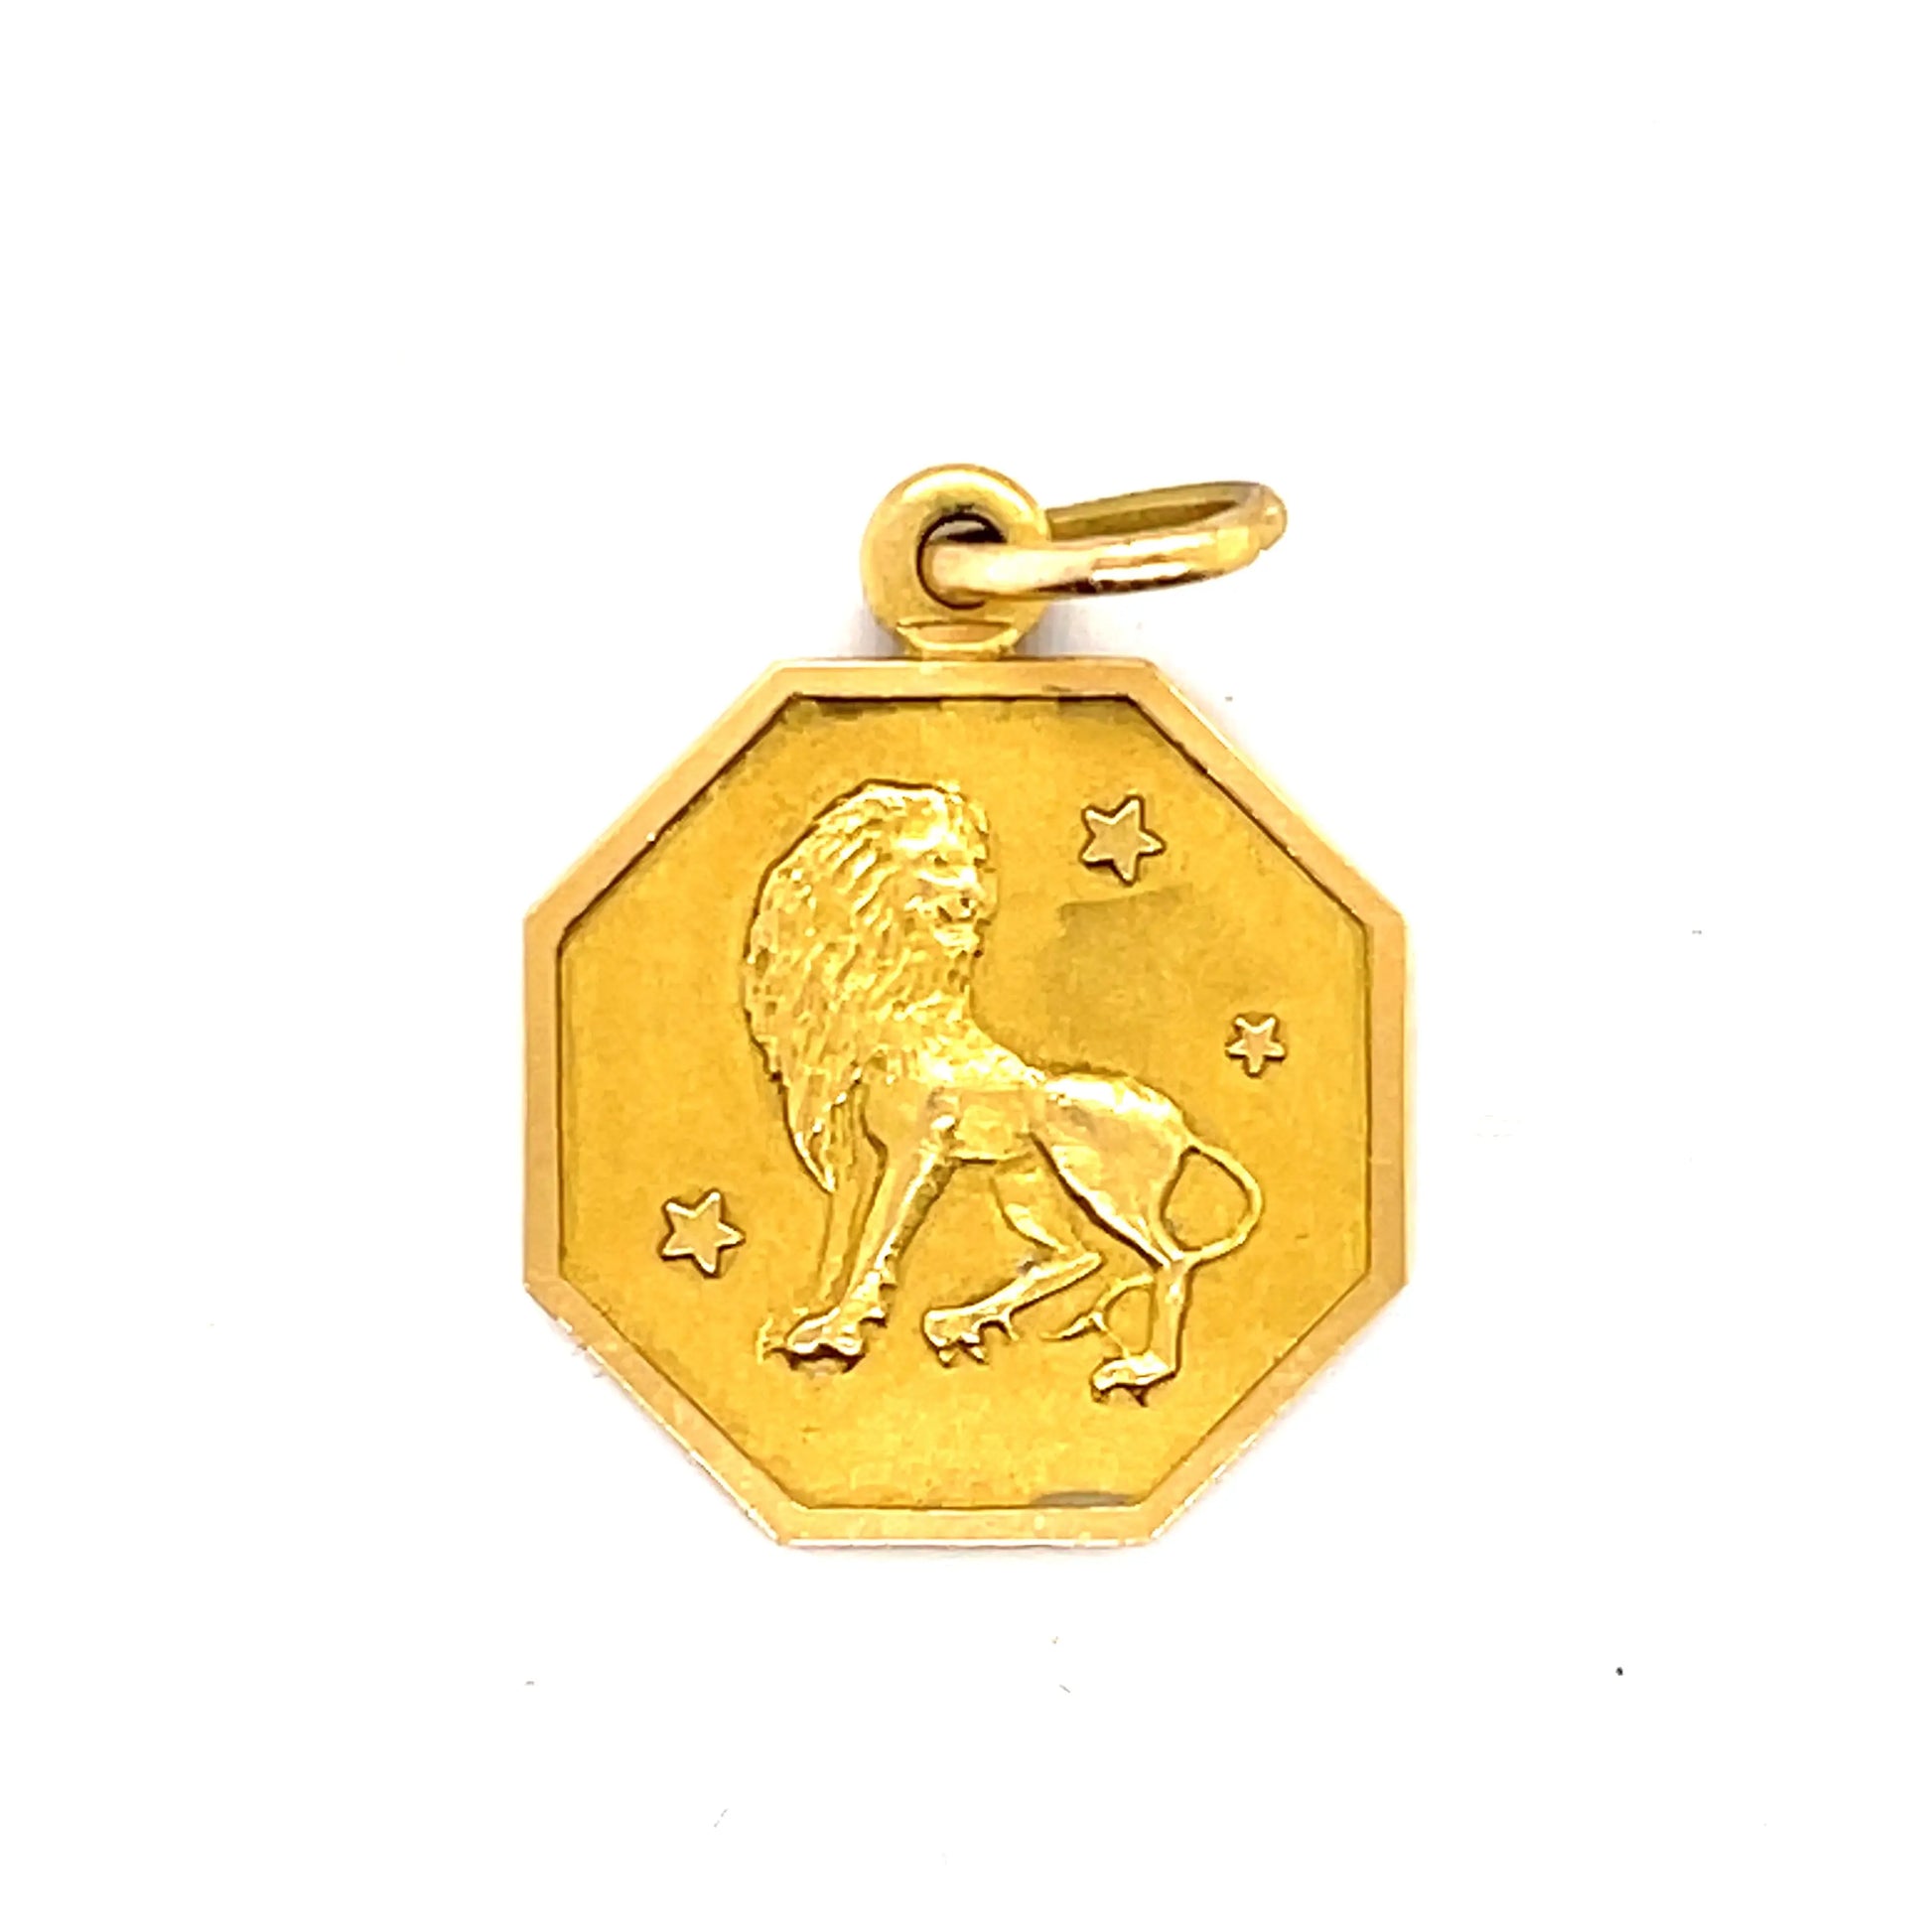 18k yellow gold griffin pendant  Great on its own or stacked with other charms.  One of a kind  The griffin is used to denote strength and military courage and leadership. Griffins are portrayed with the rear body of a lion, an eagle's head with erect ears, a feathered breast, and the forelegs of an eagle, including claws. These features indicate a combination of intelligence and strength.